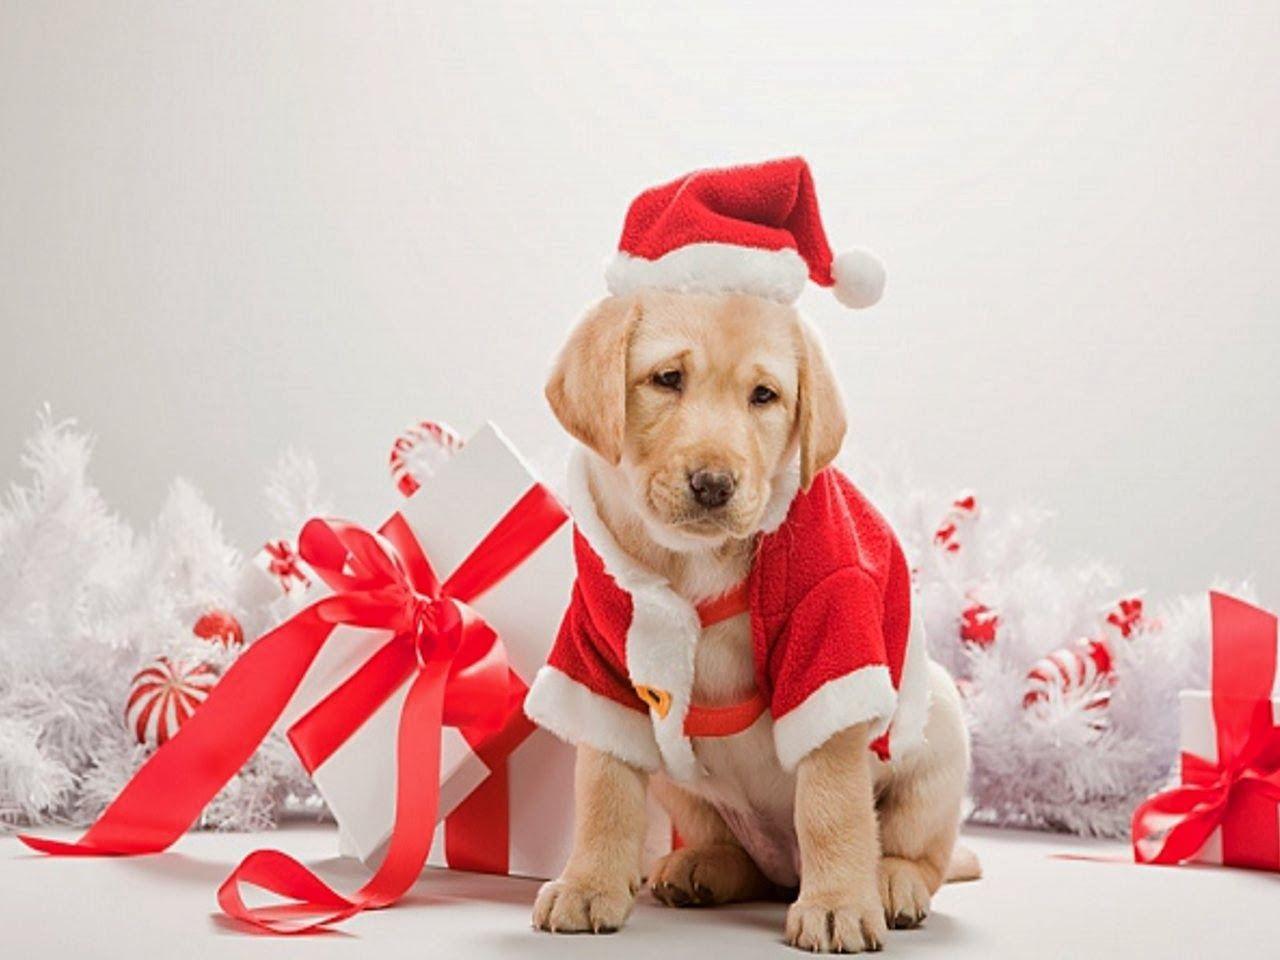 35400 Christmas Puppy Stock Photos Pictures  RoyaltyFree Images   iStock  Christmas puppy white background Christmas puppy family Cute christmas  puppy